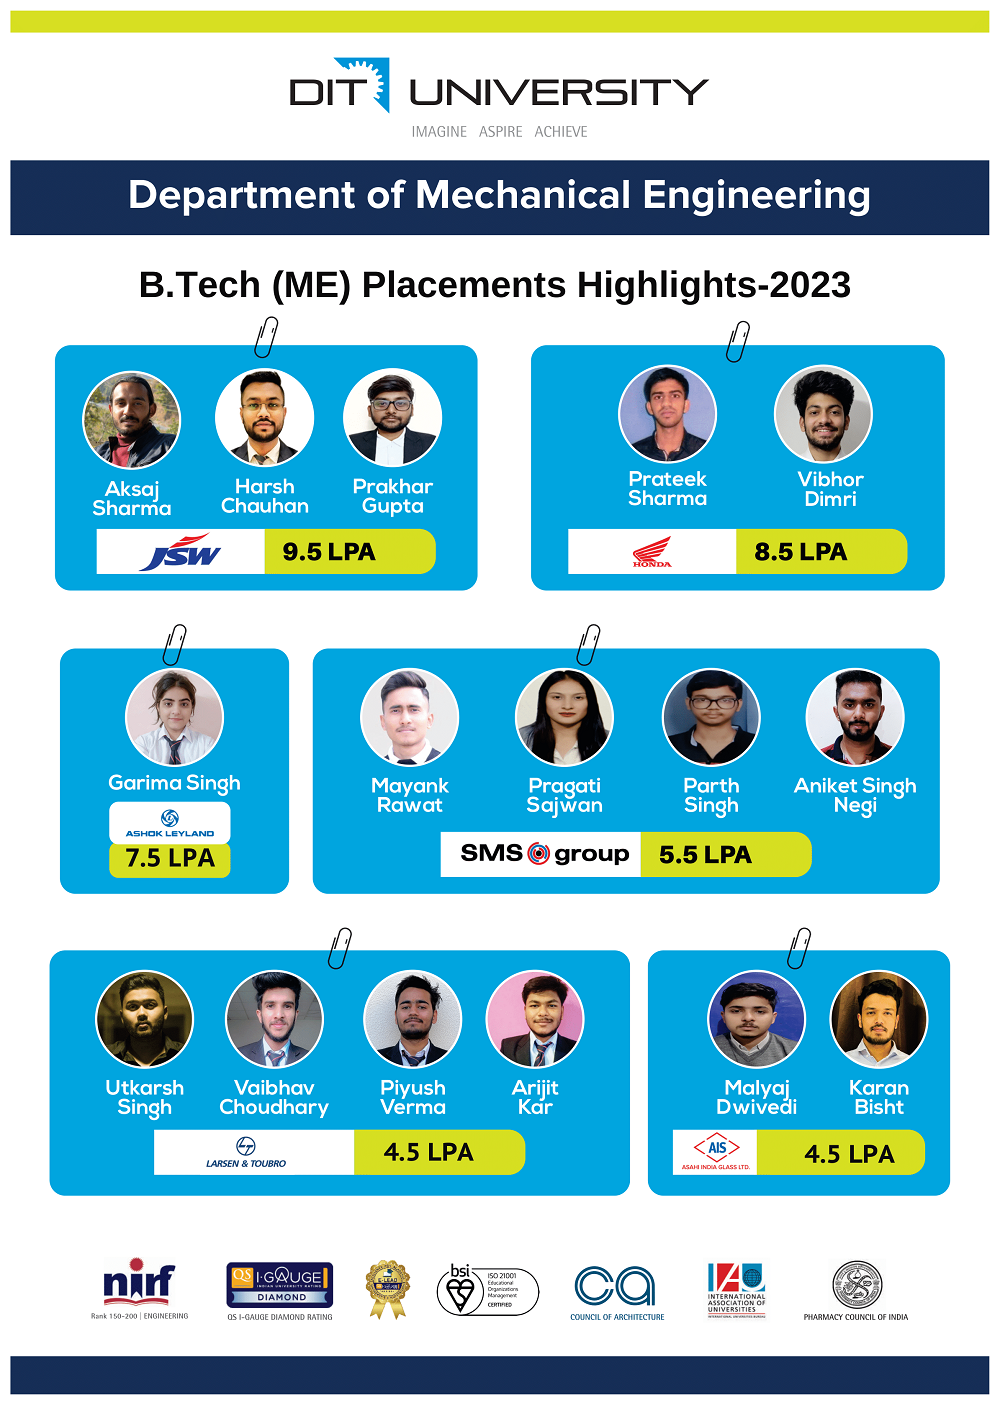 B.Tech (ME) Placements Highlights 2023